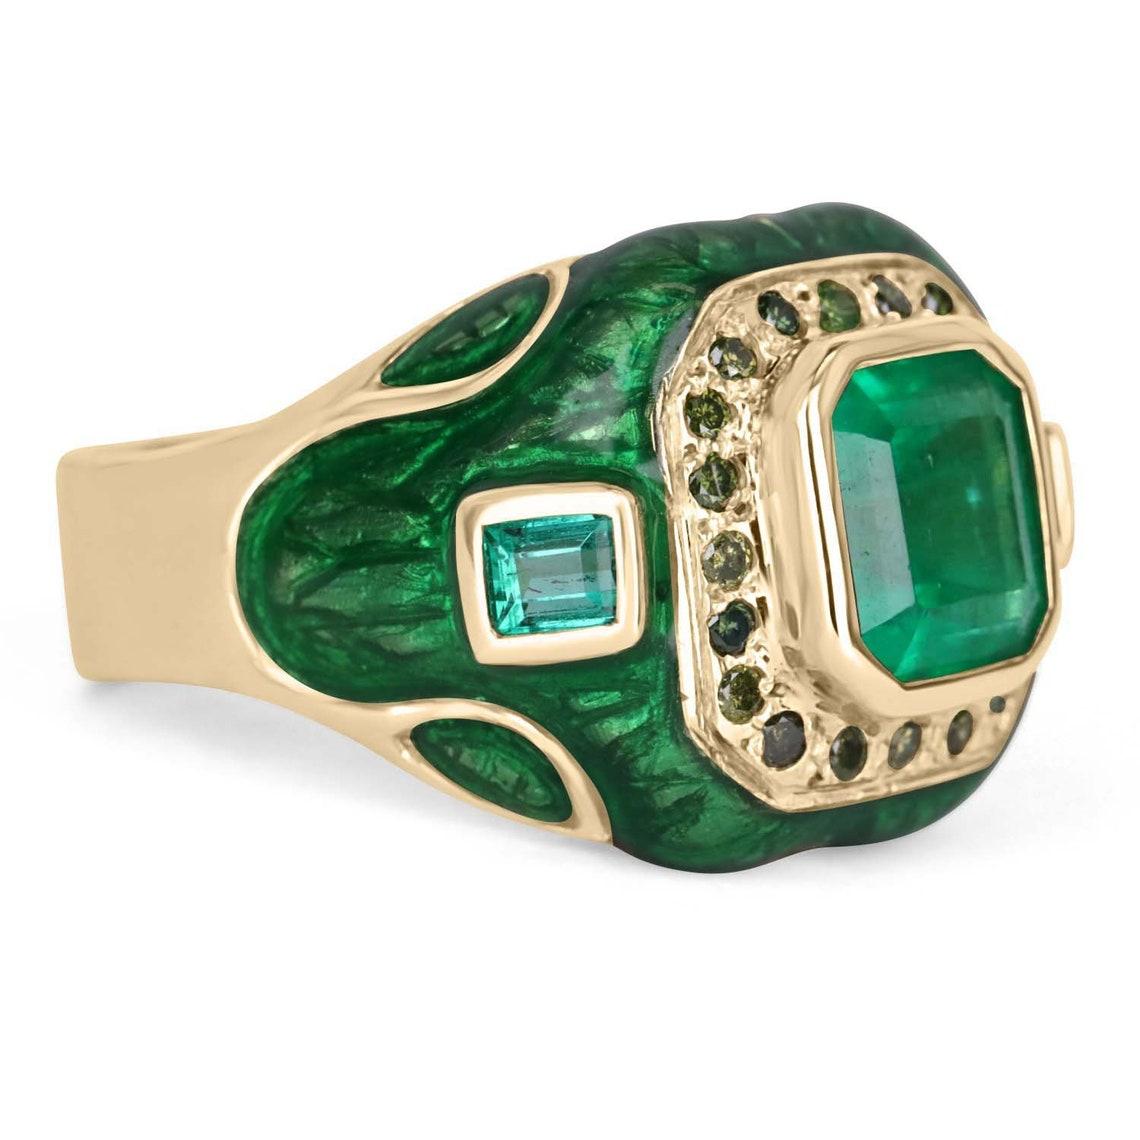 A men's Colombian emerald & green diamond statement ring in 14K gold. This ring features a 4.45-carat Asscher cut emerald in its center. The rare gemstone has a desirable color and transparent eye clarity. The Colombian emerald is bezel set and is